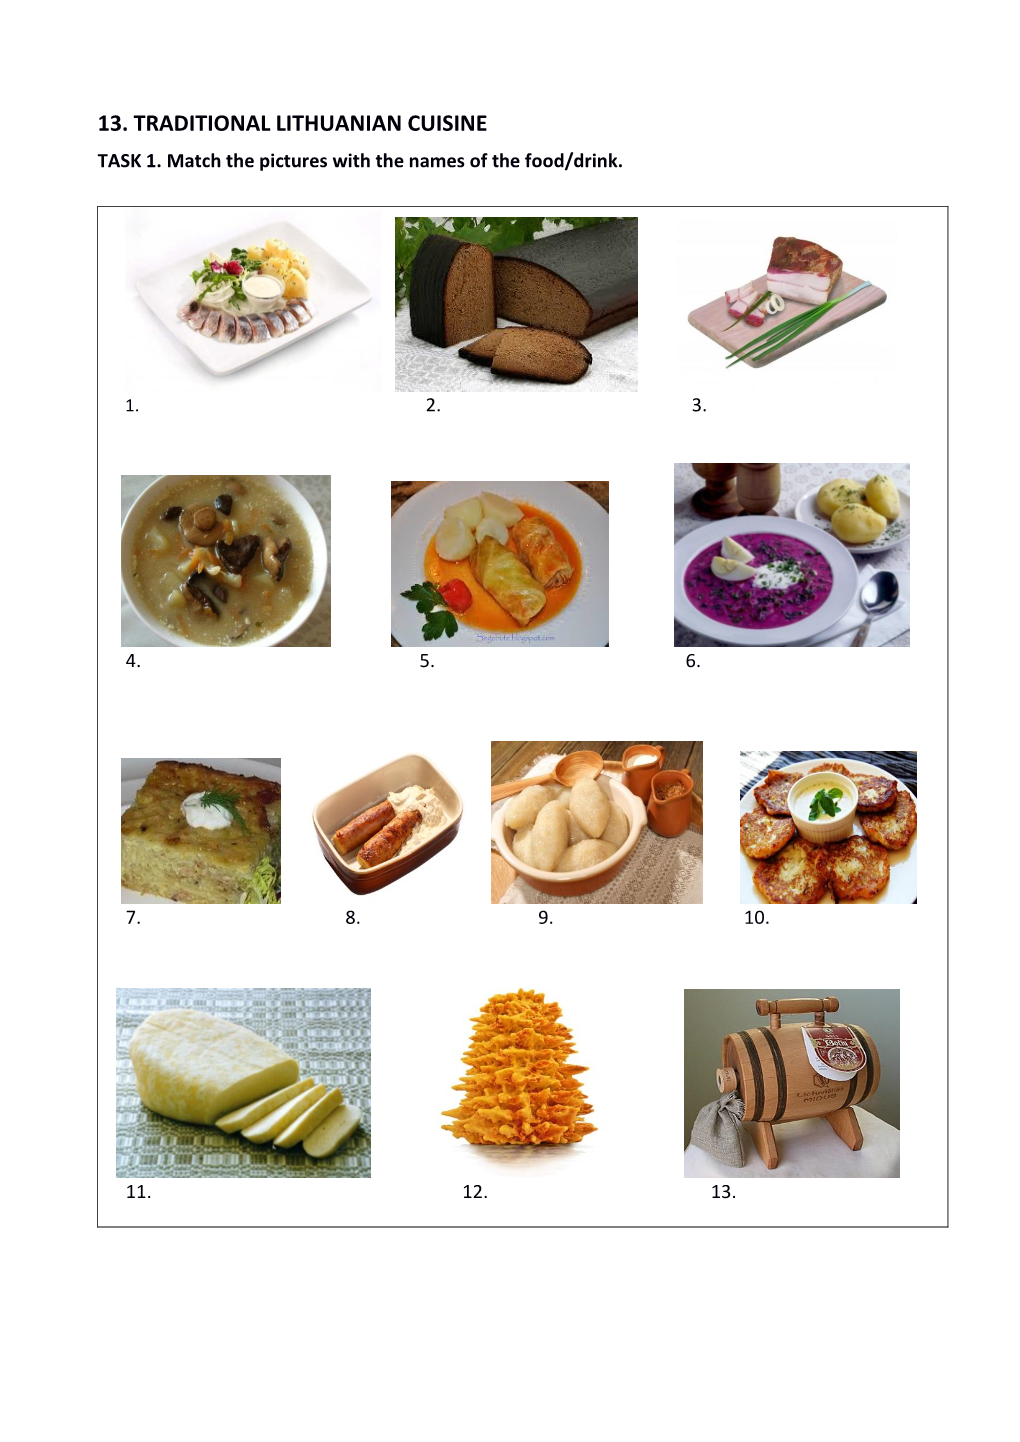 13. Traditional Lithuanian Cuisine Task 1